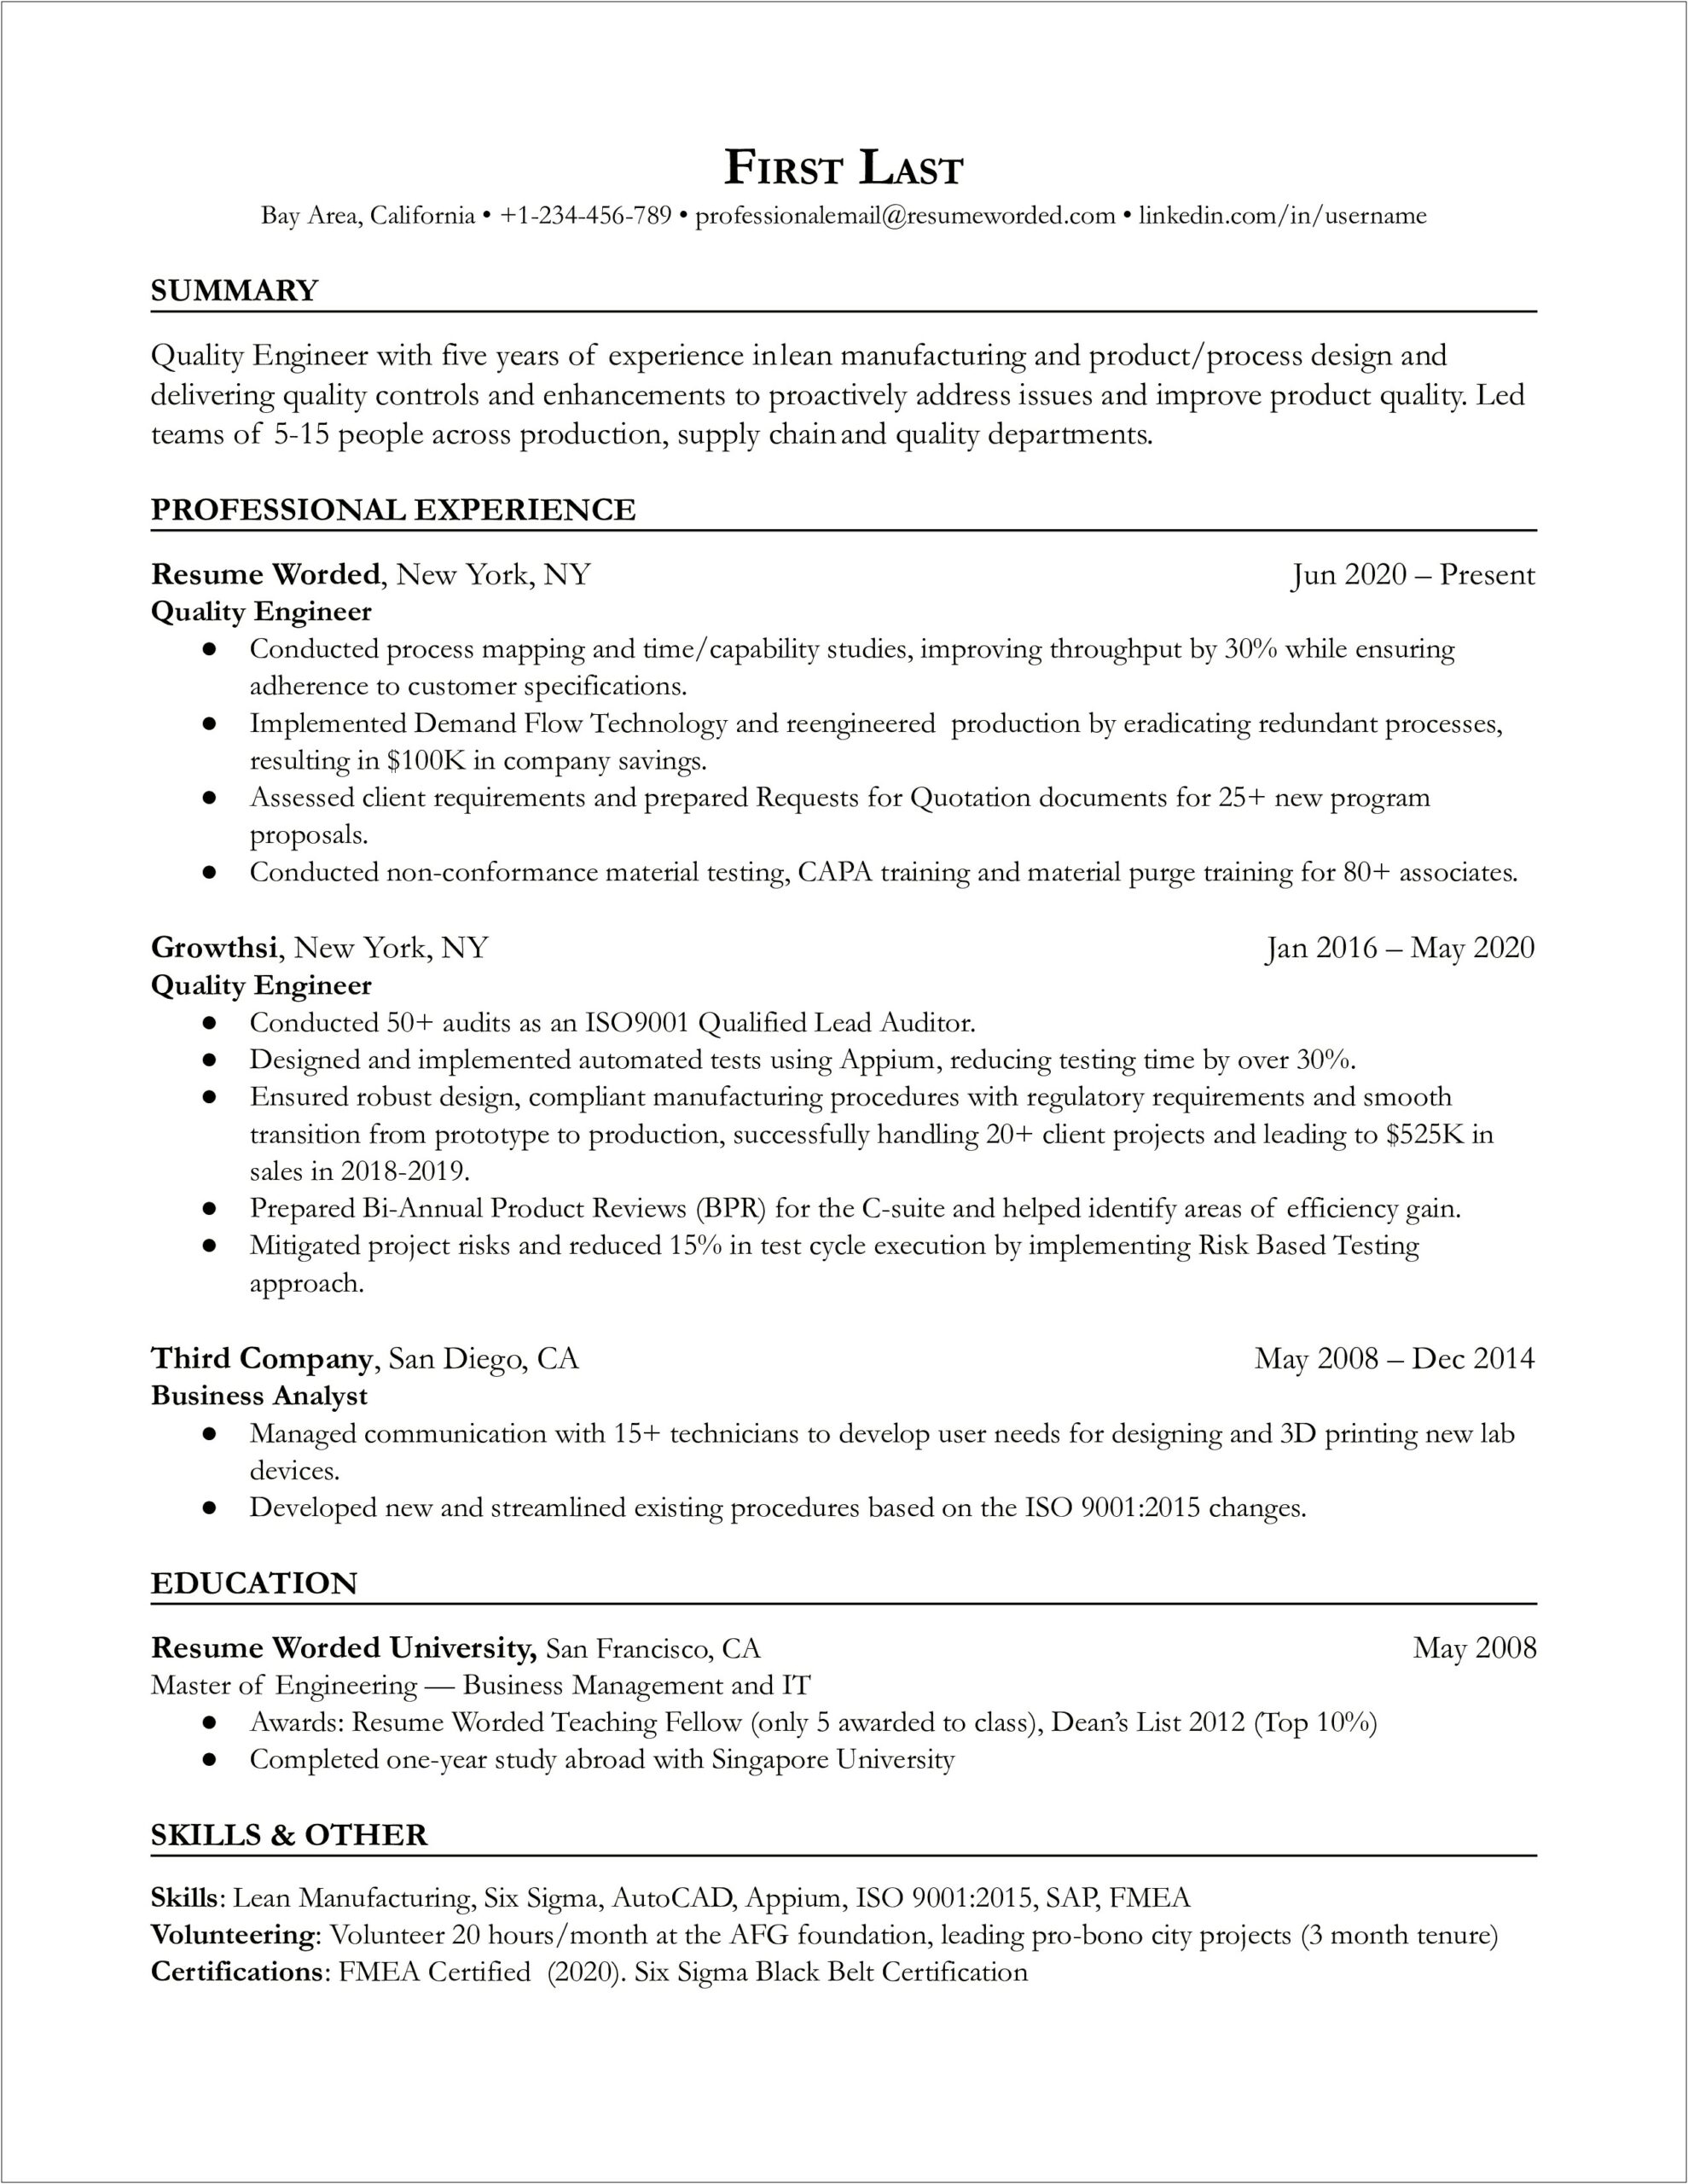 Appium Testing Resume For 1 Year Of Experience